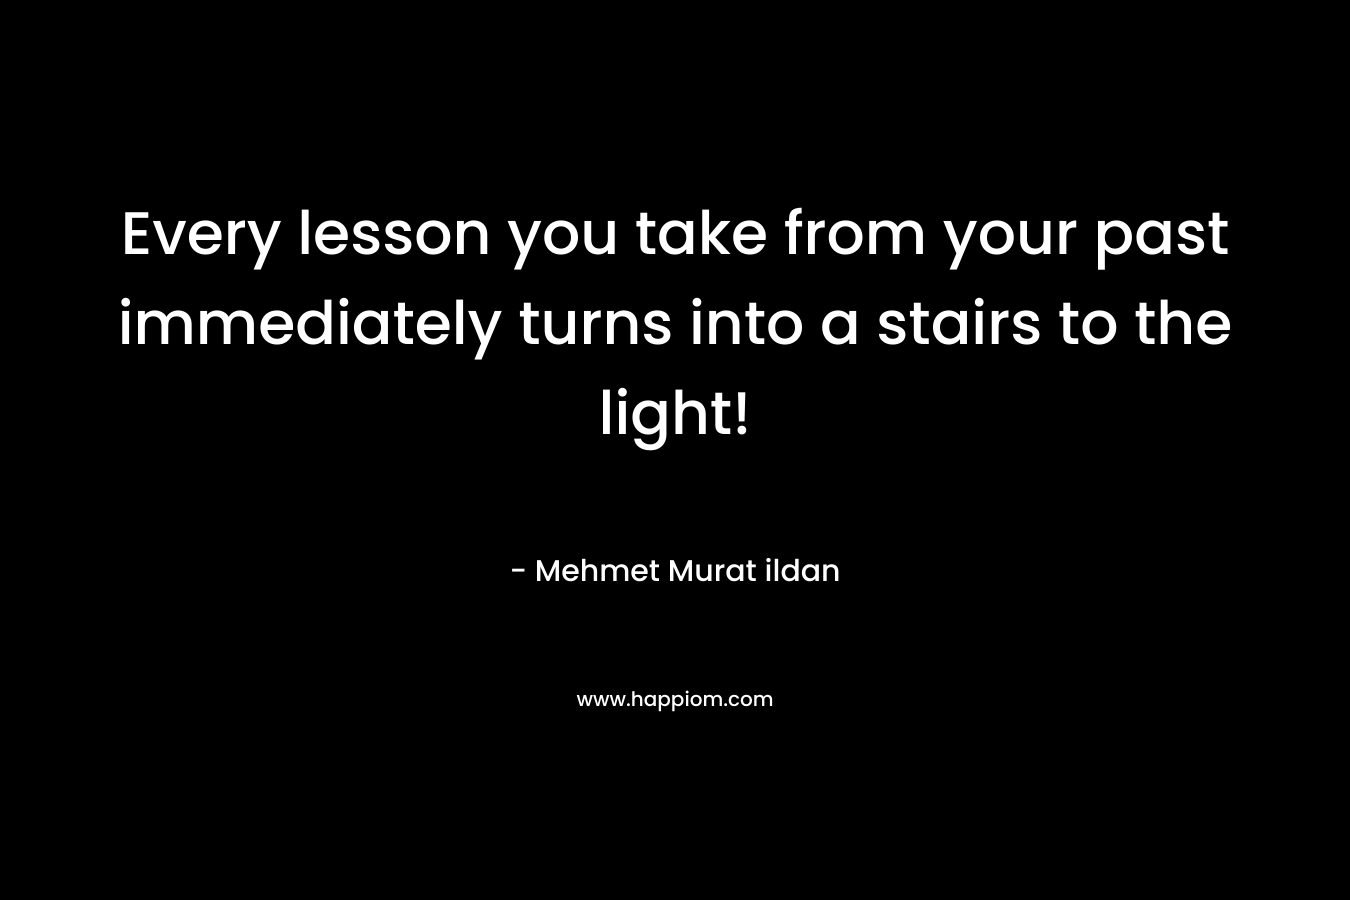 Every lesson you take from your past immediately turns into a stairs to the light!